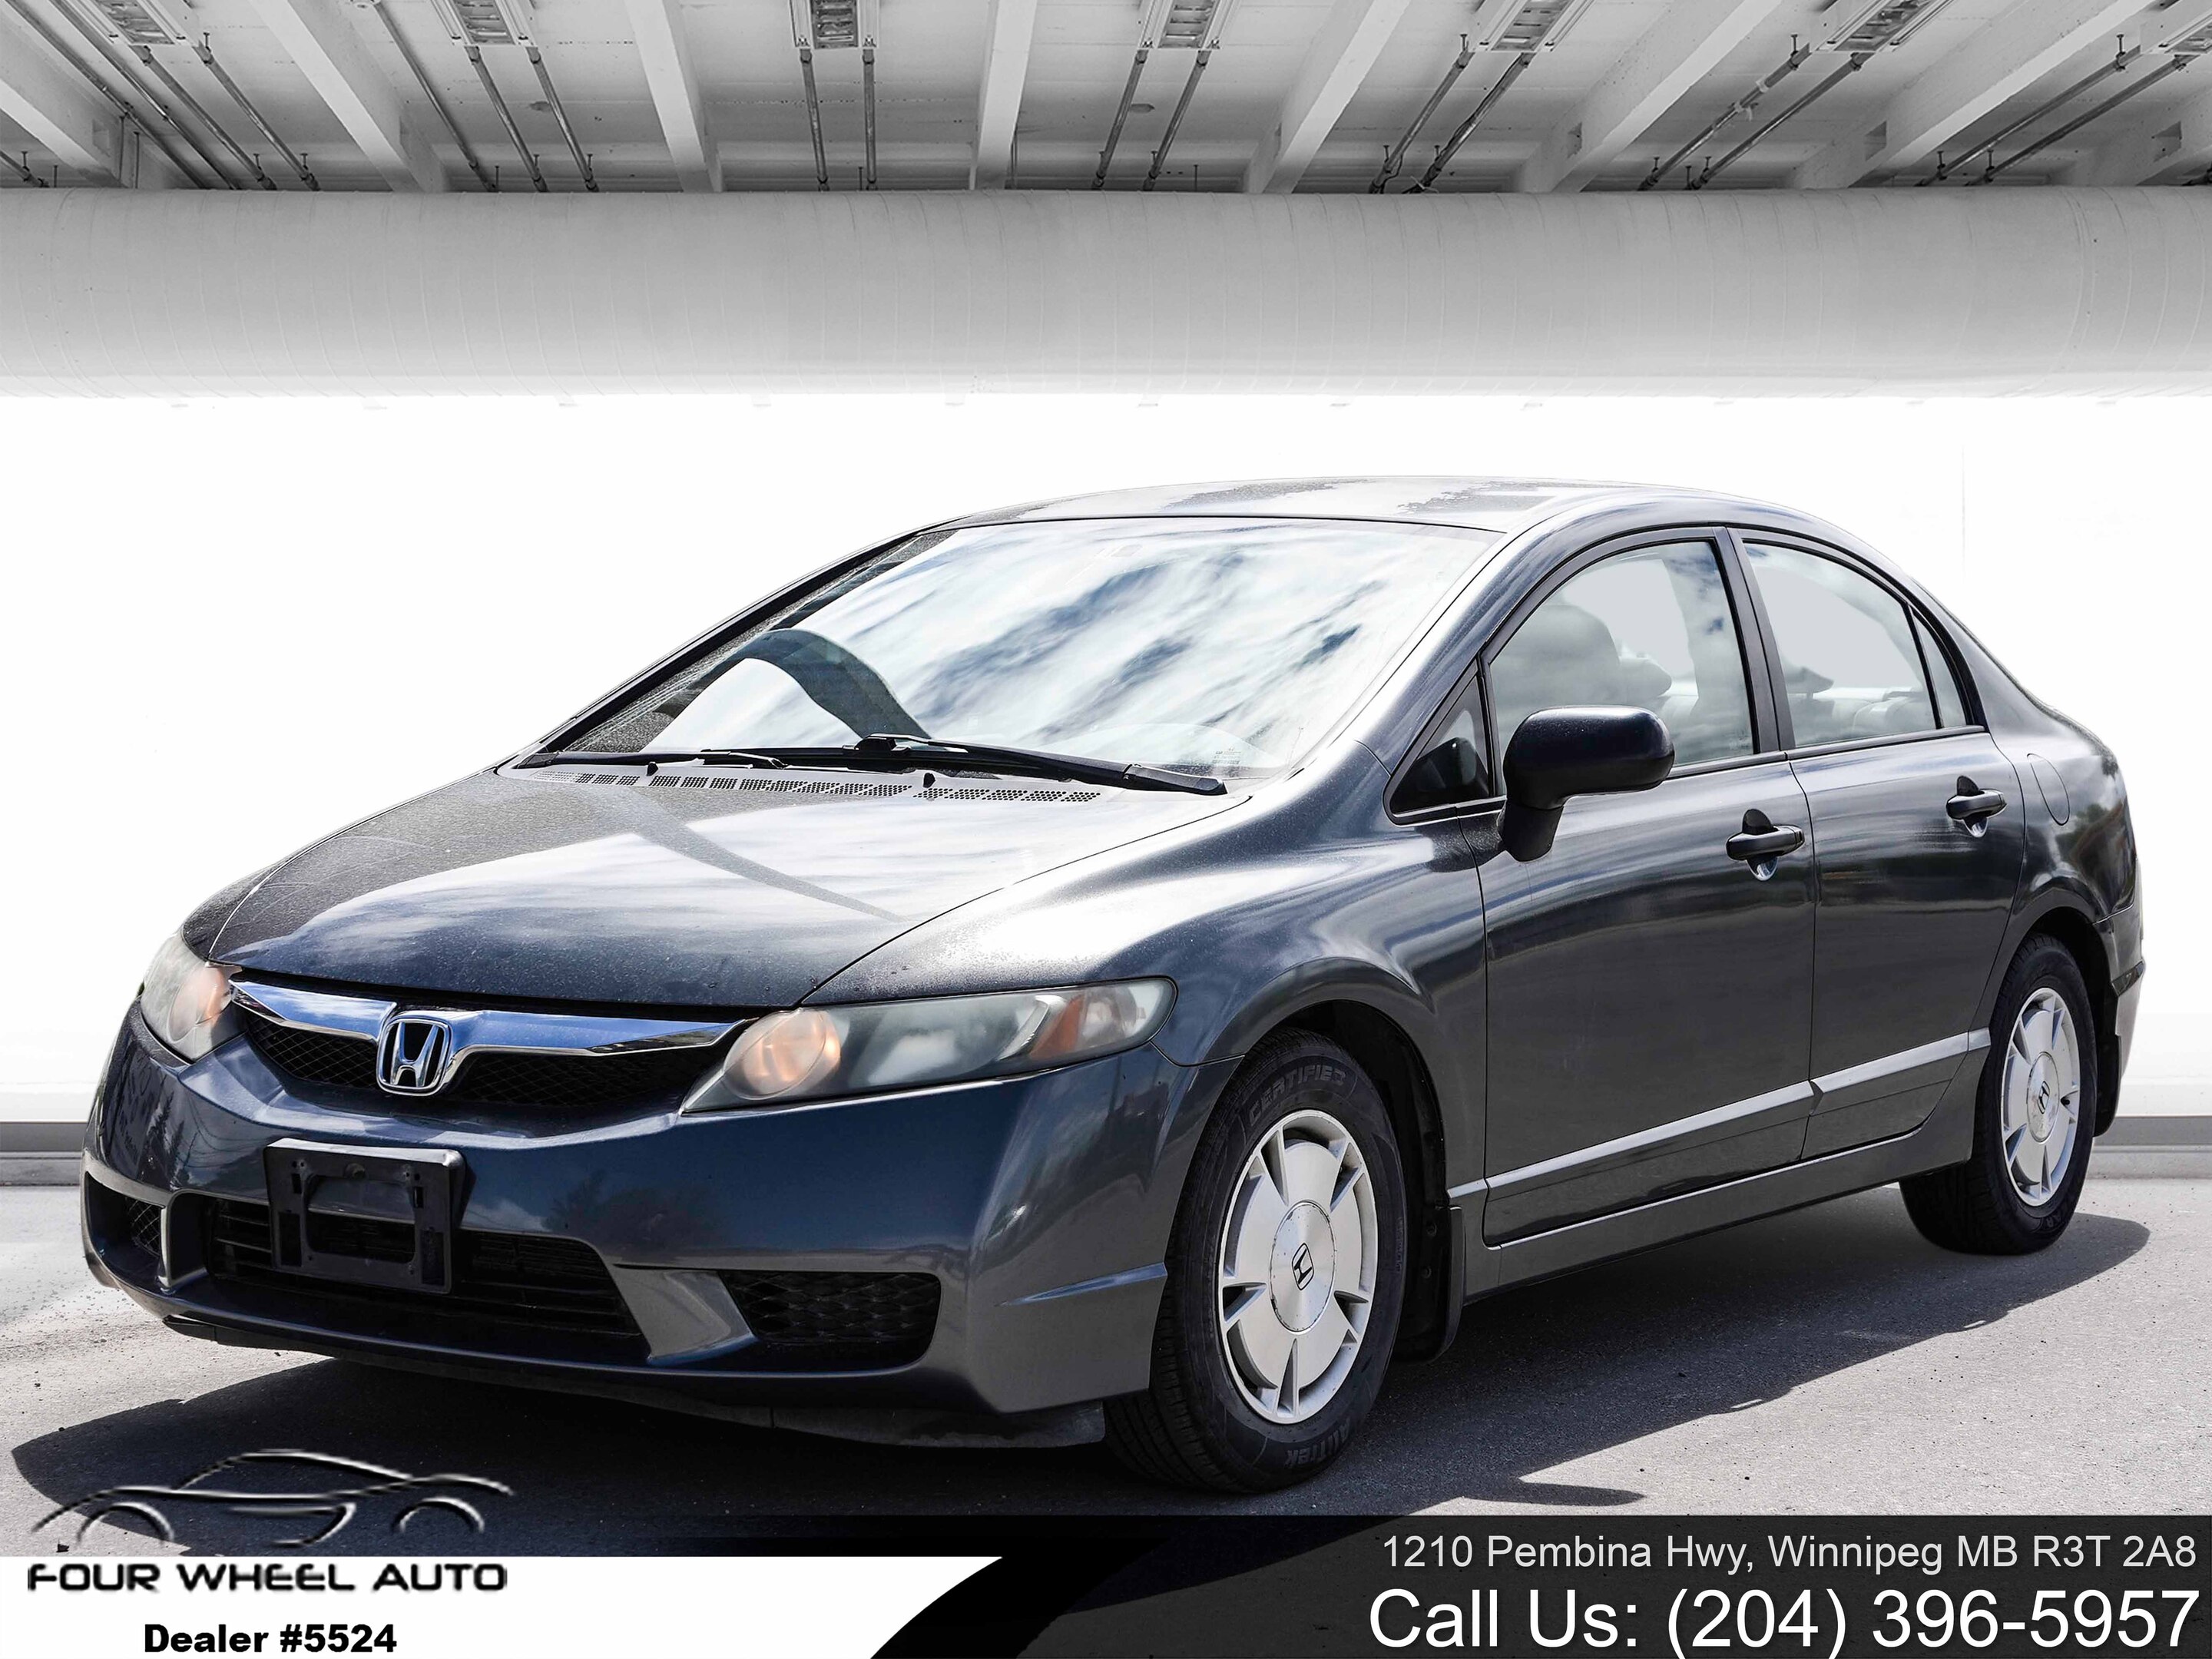 2009 Honda Civic 4dr Auto DX-G |Clean Title |Well-Maintained|